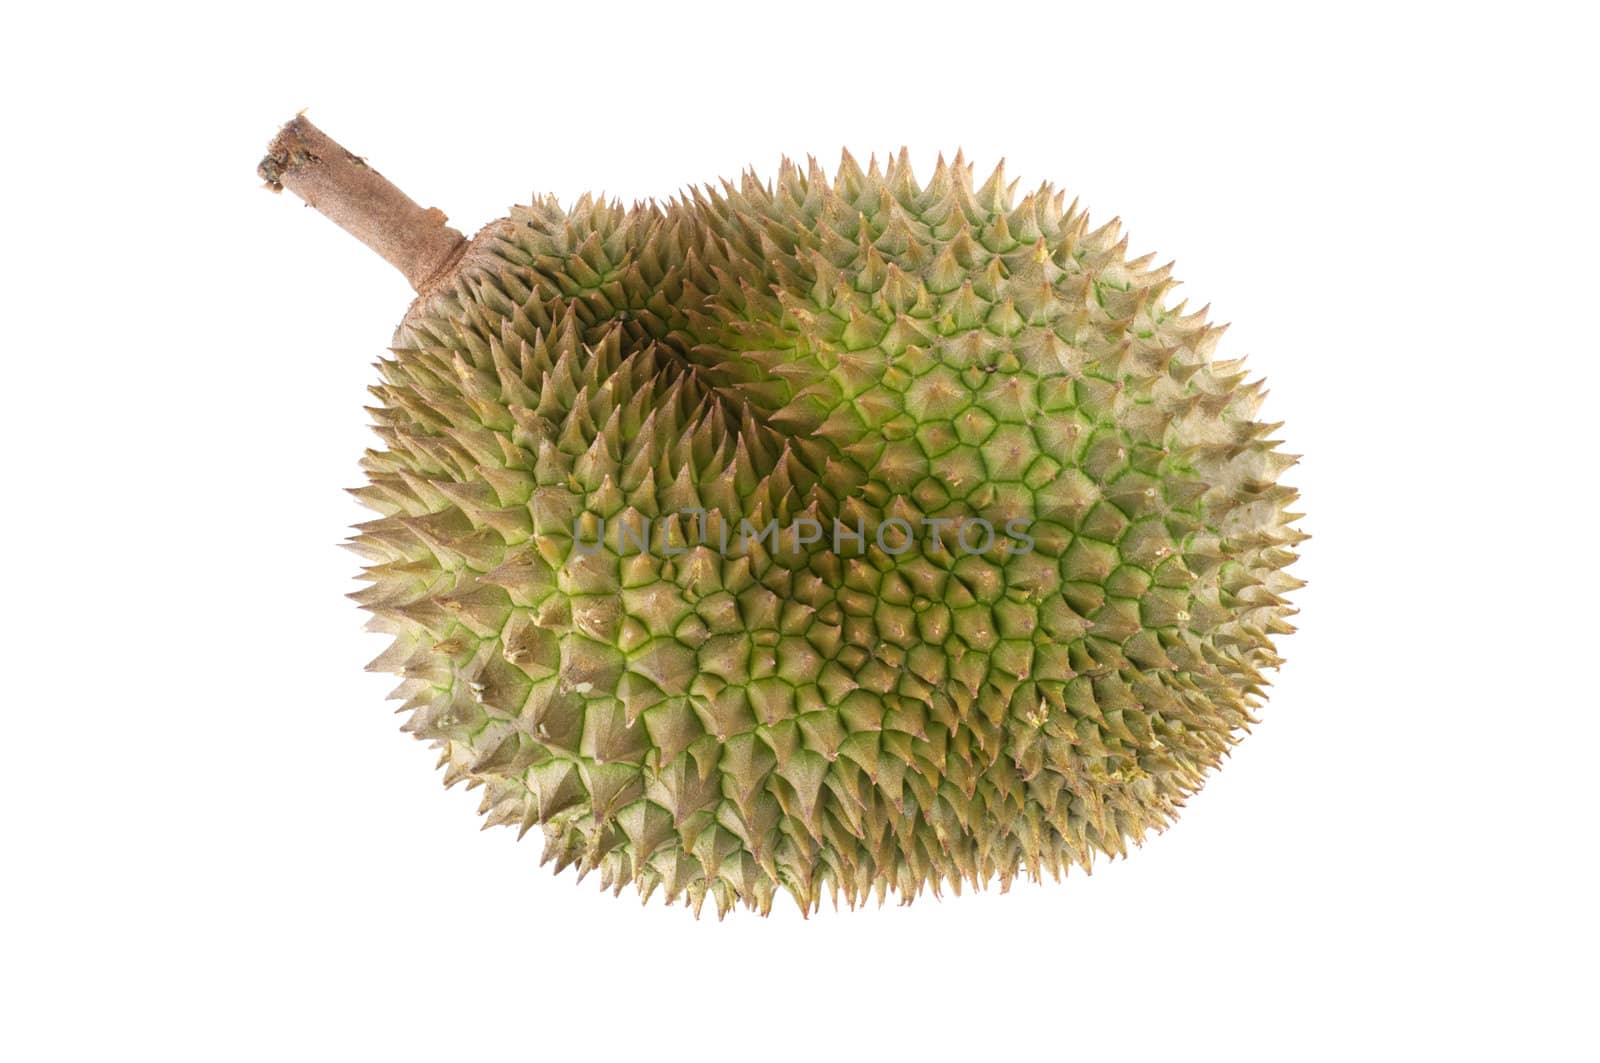 Tropical fruit - Durian isolated on white background.